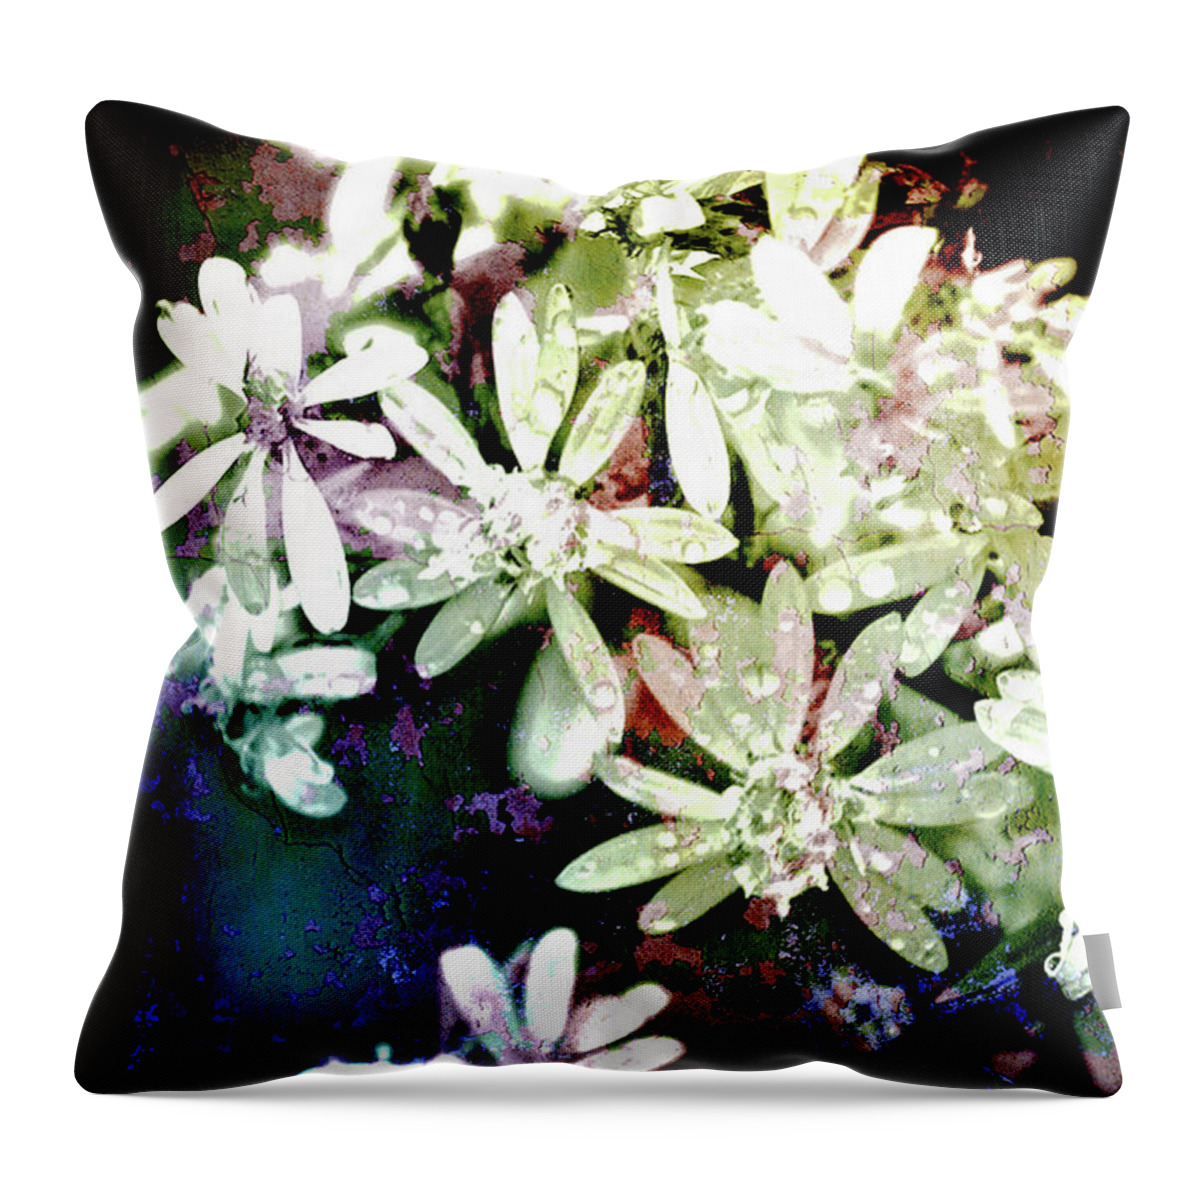 Texture Throw Pillow featuring the photograph Texture Flowers #3 by Prince Andre Faubert